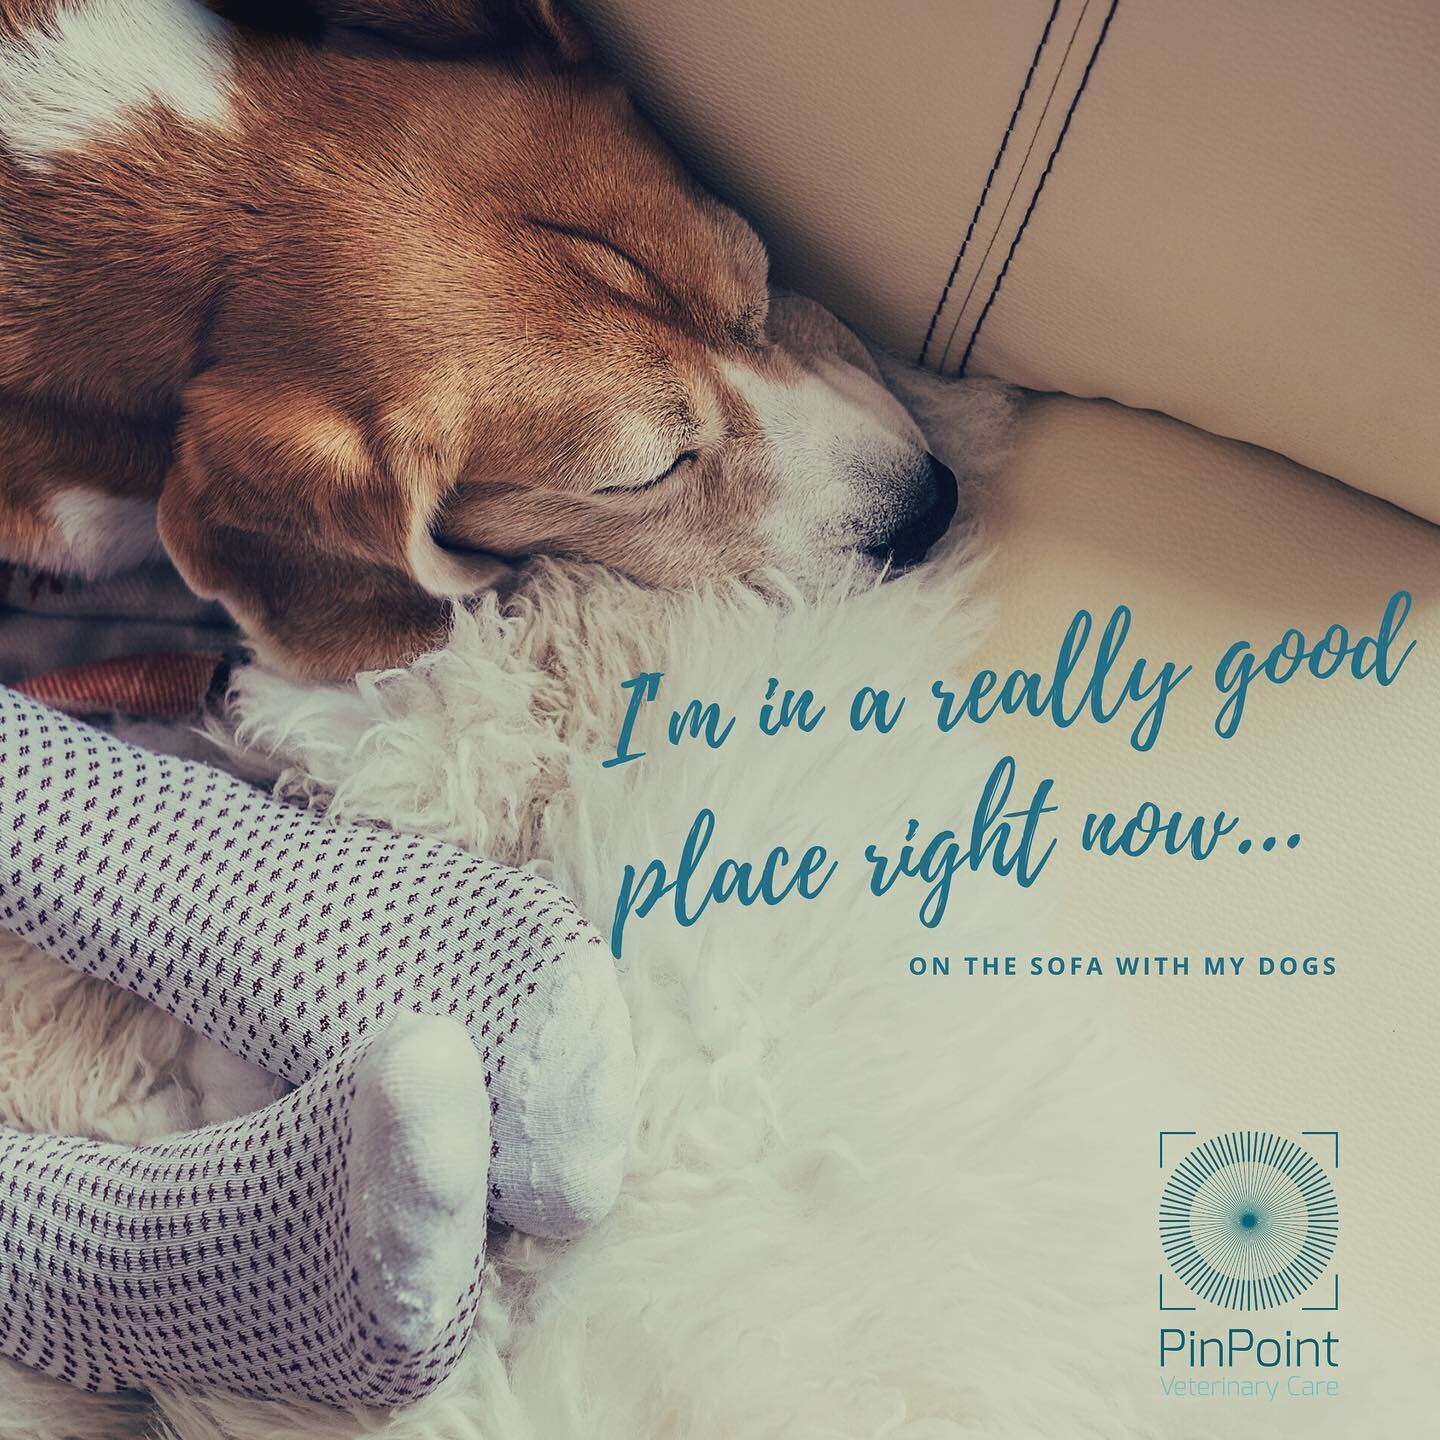 A wet bank holiday Monday may not be what we ordered, but we can still make the most of it with Integrative Veterinary Care! ☔💚🐾
Rainy days can be tough for pets and their owners, especially those with conditions that can worsen due to stress or en